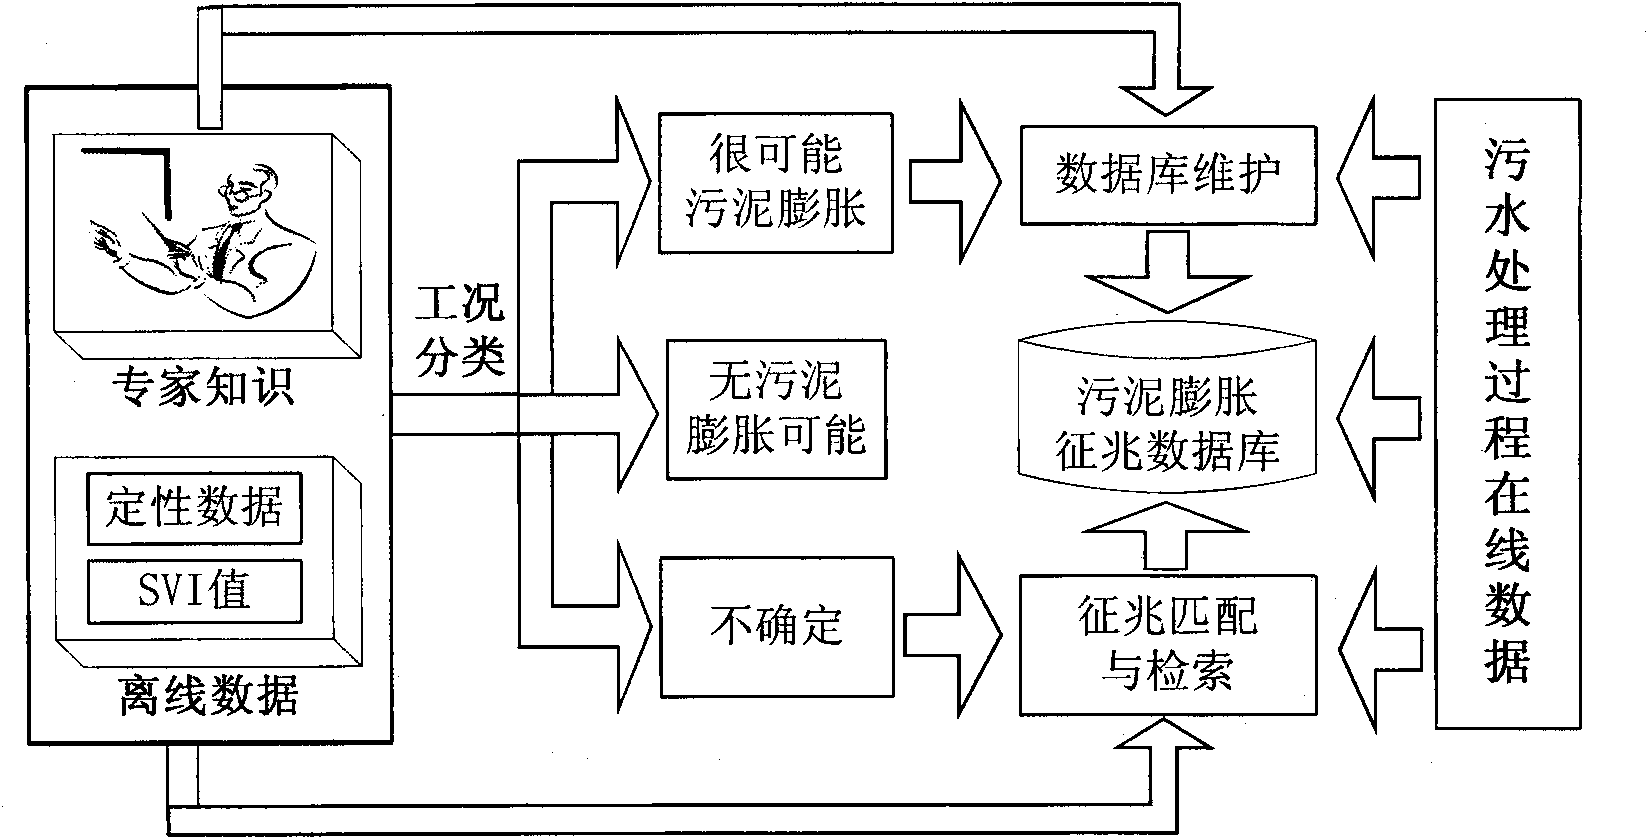 Sludge bulking predetermining method by activated sludge process in sewage treating process